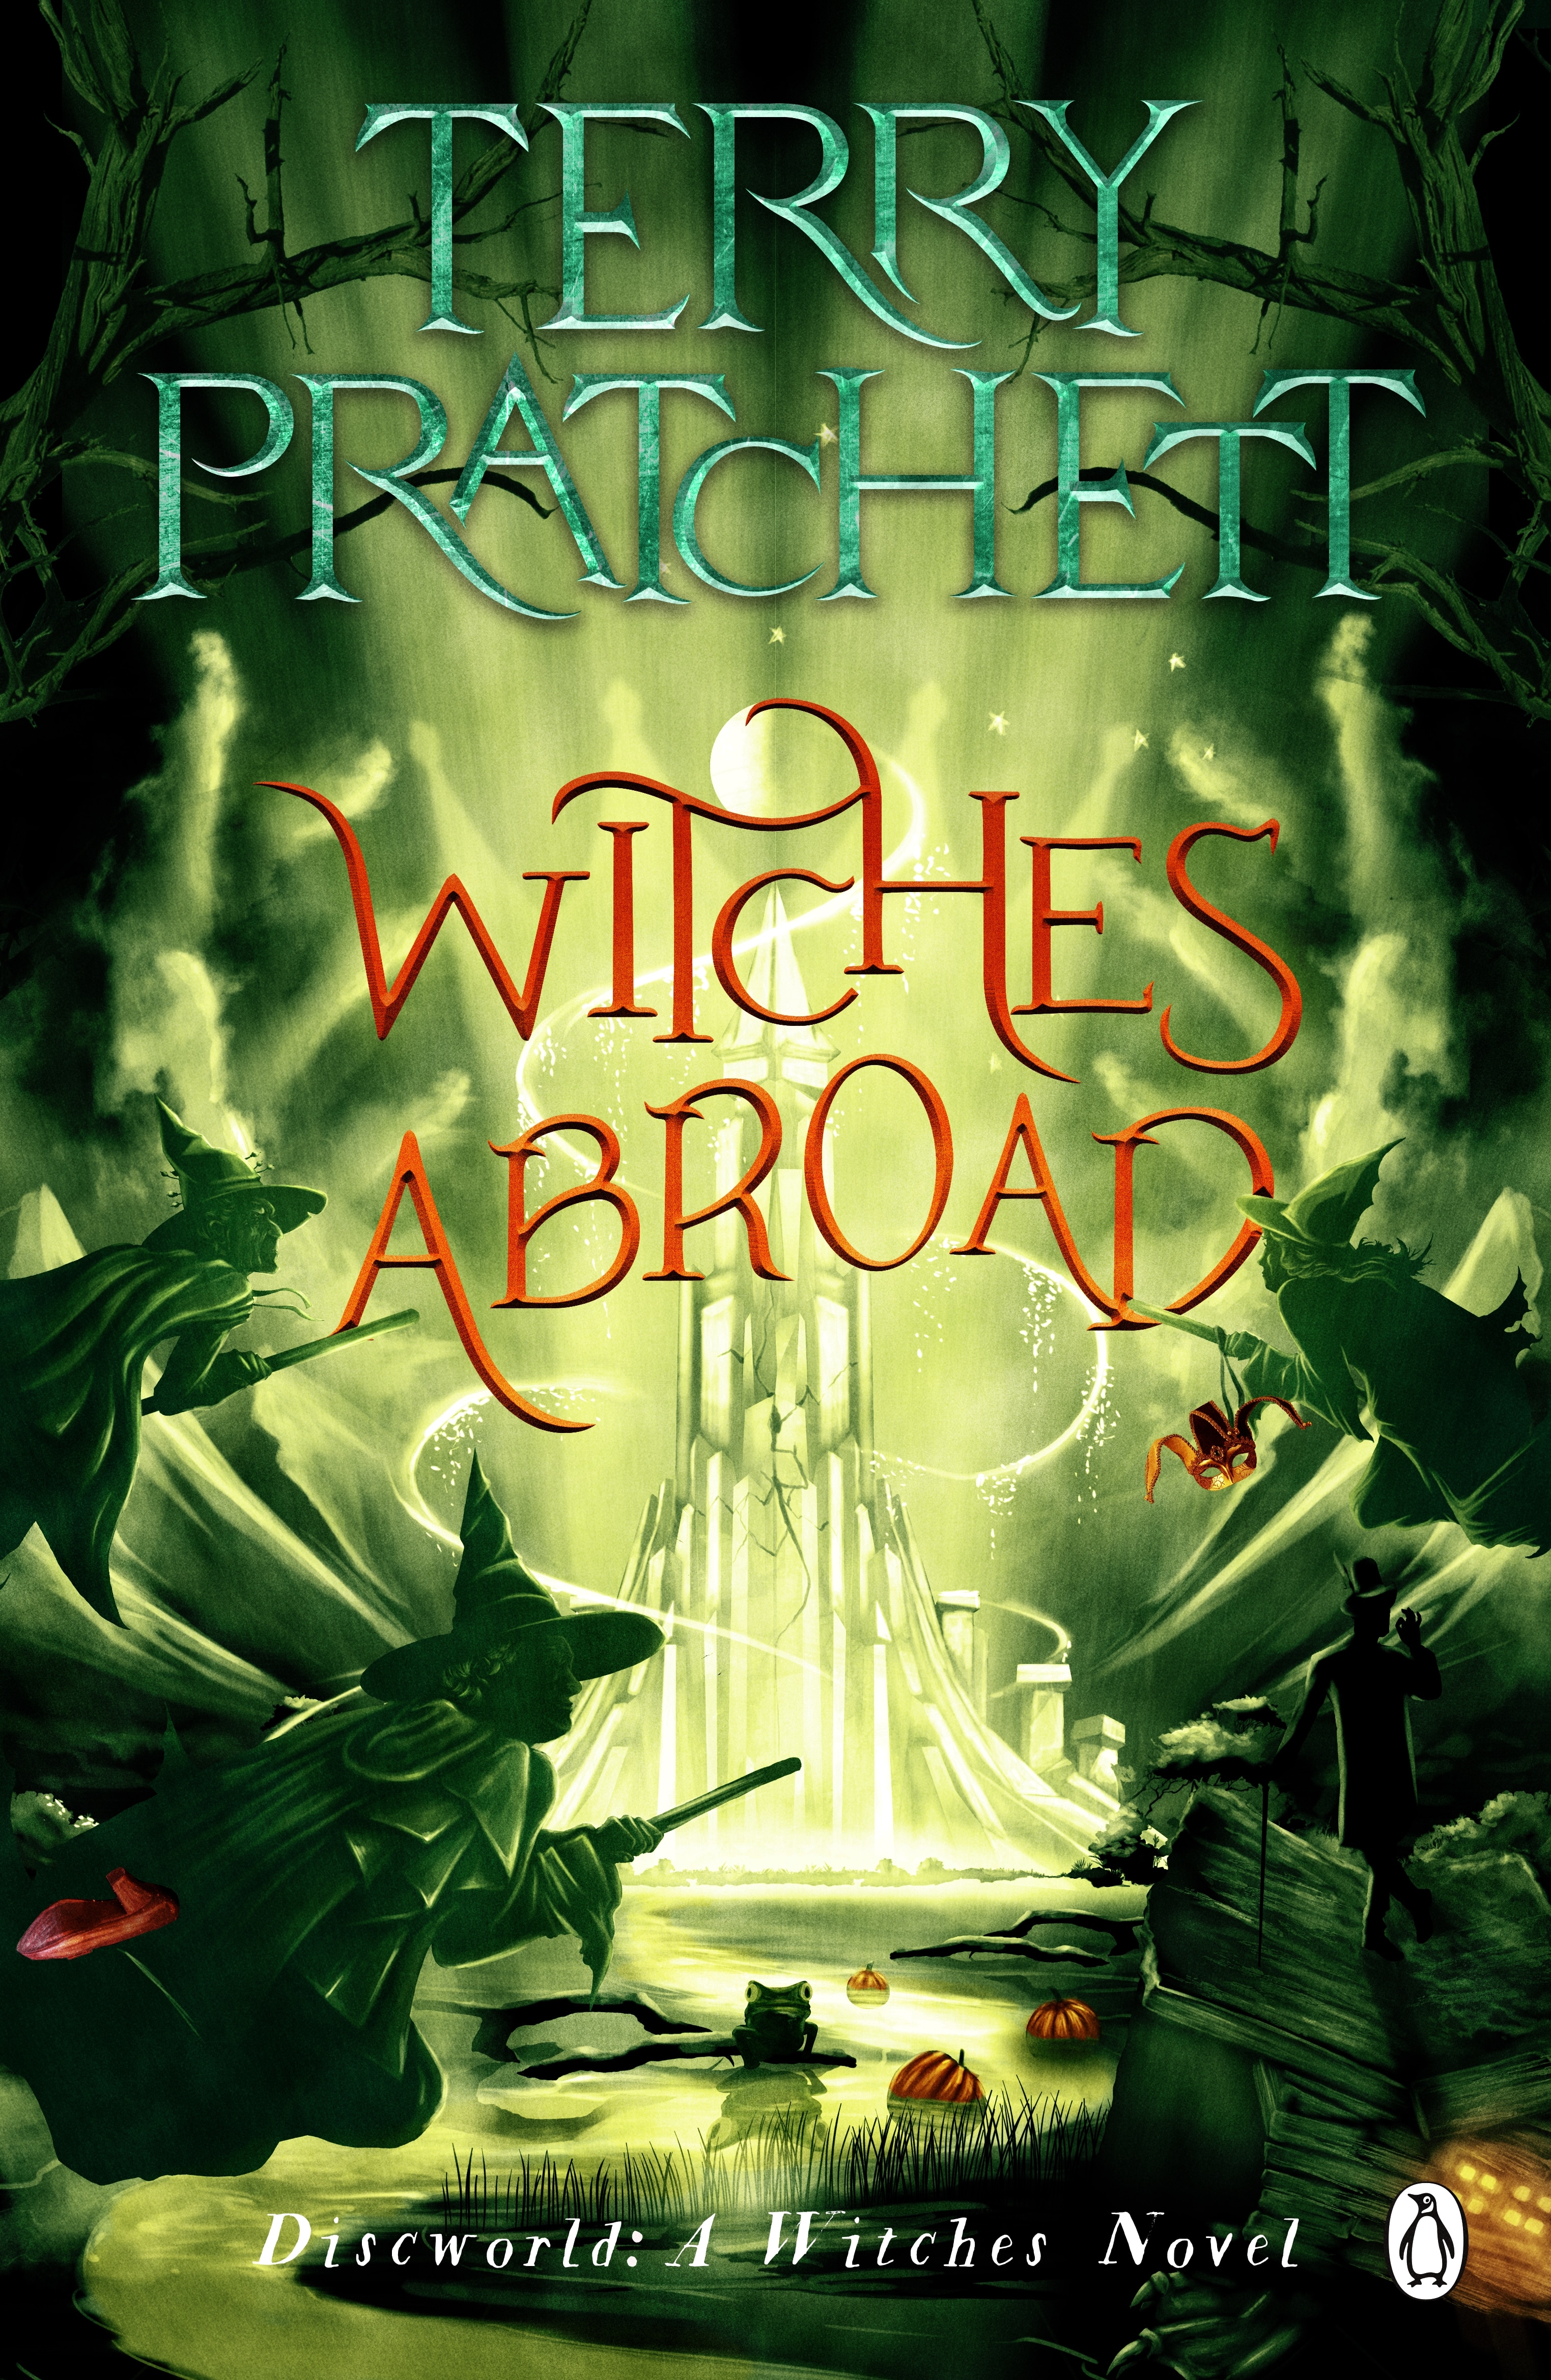 Book “Witches Abroad” by Terry Pratchett — April 28, 2022